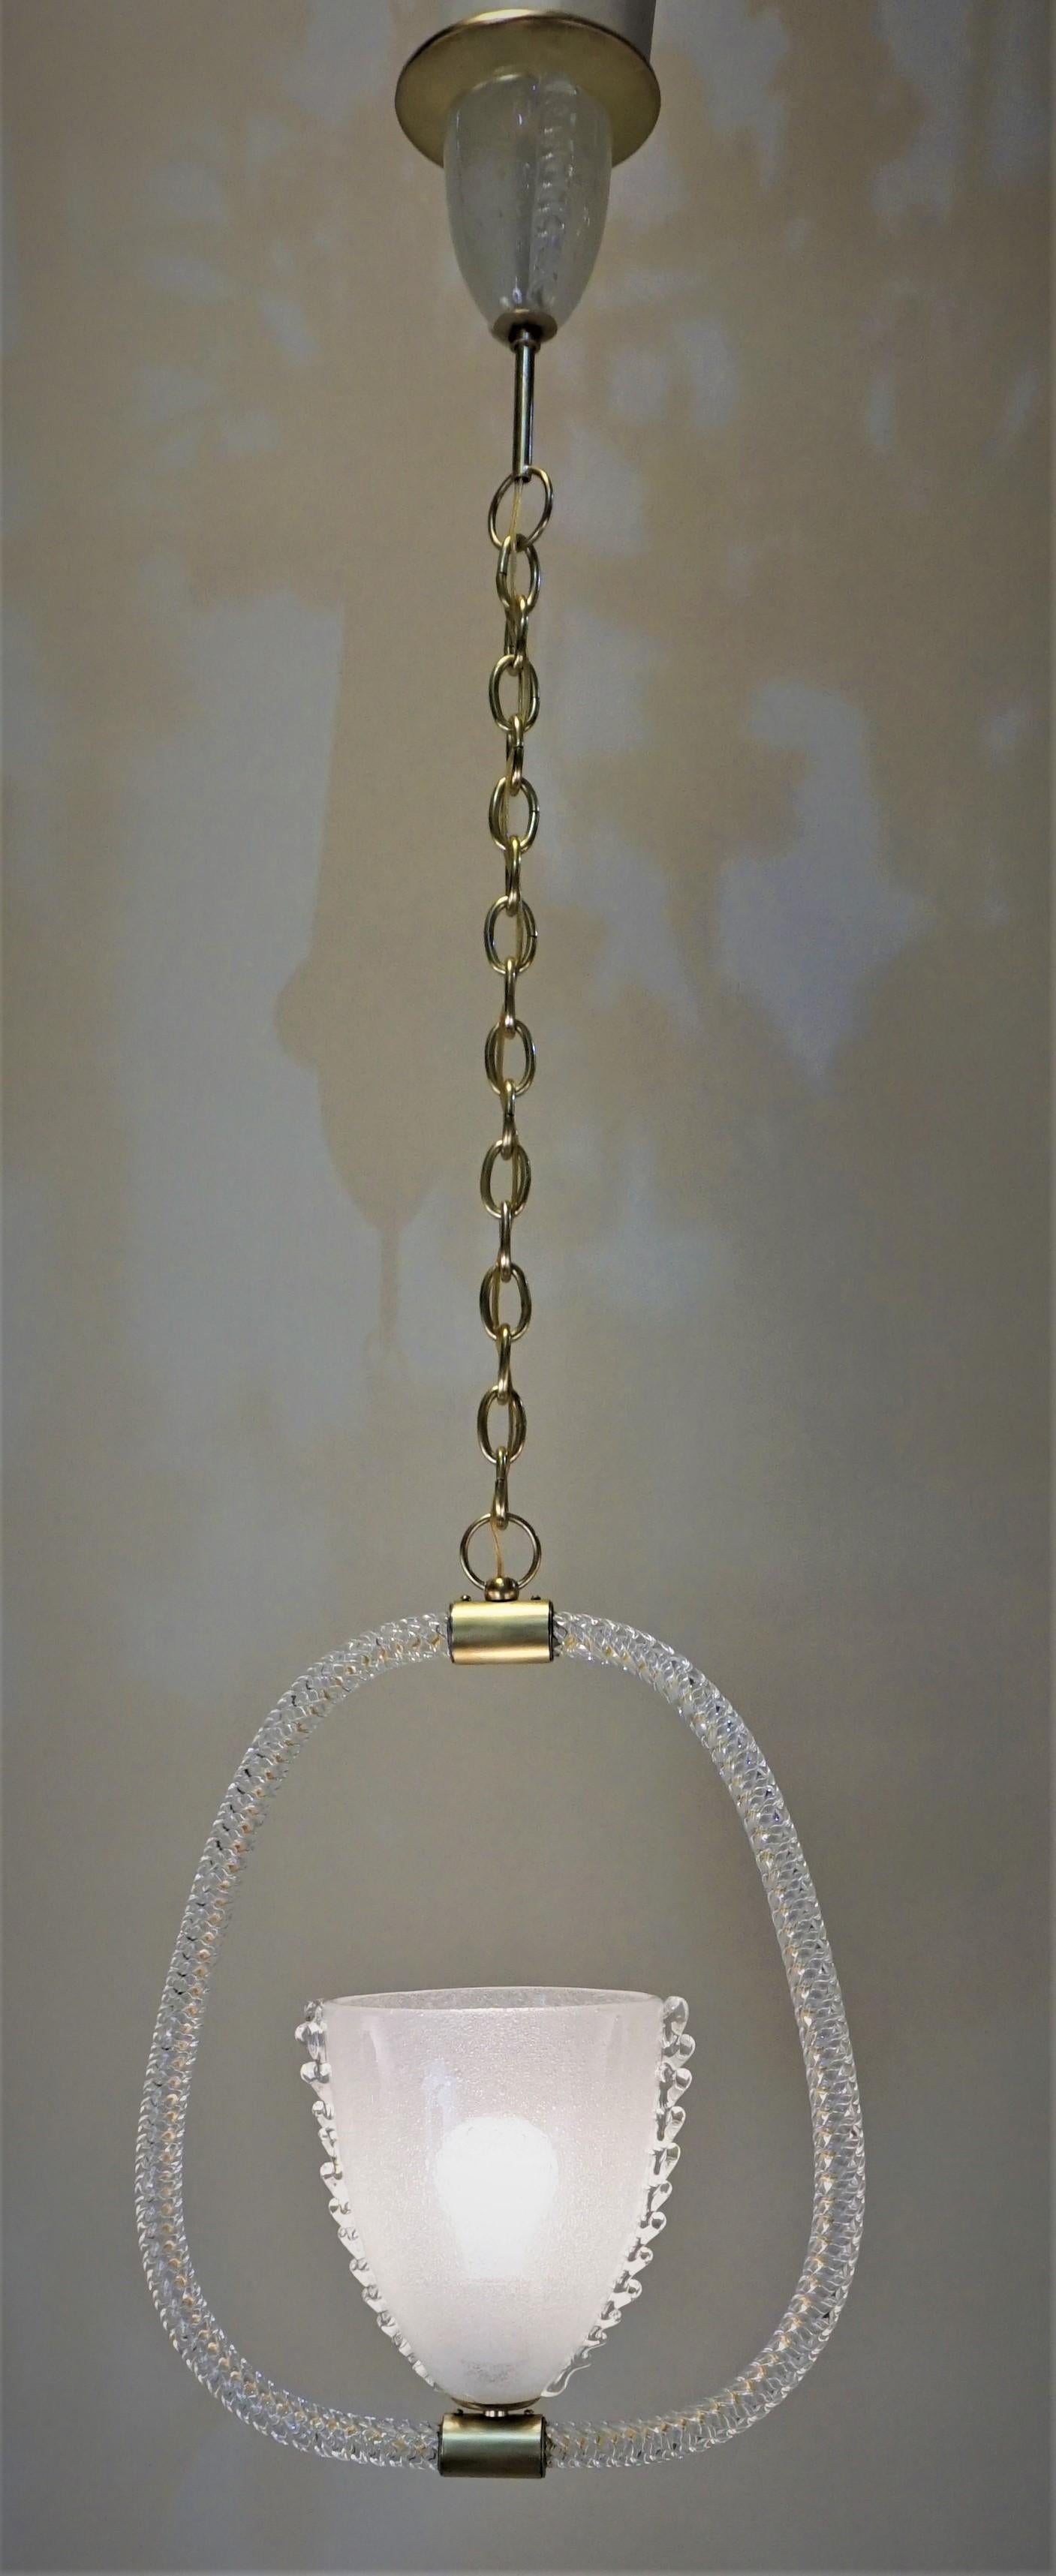 Fabulous hand blown glass chandelier by Barovier & Toso
Total height with all the chain is 48